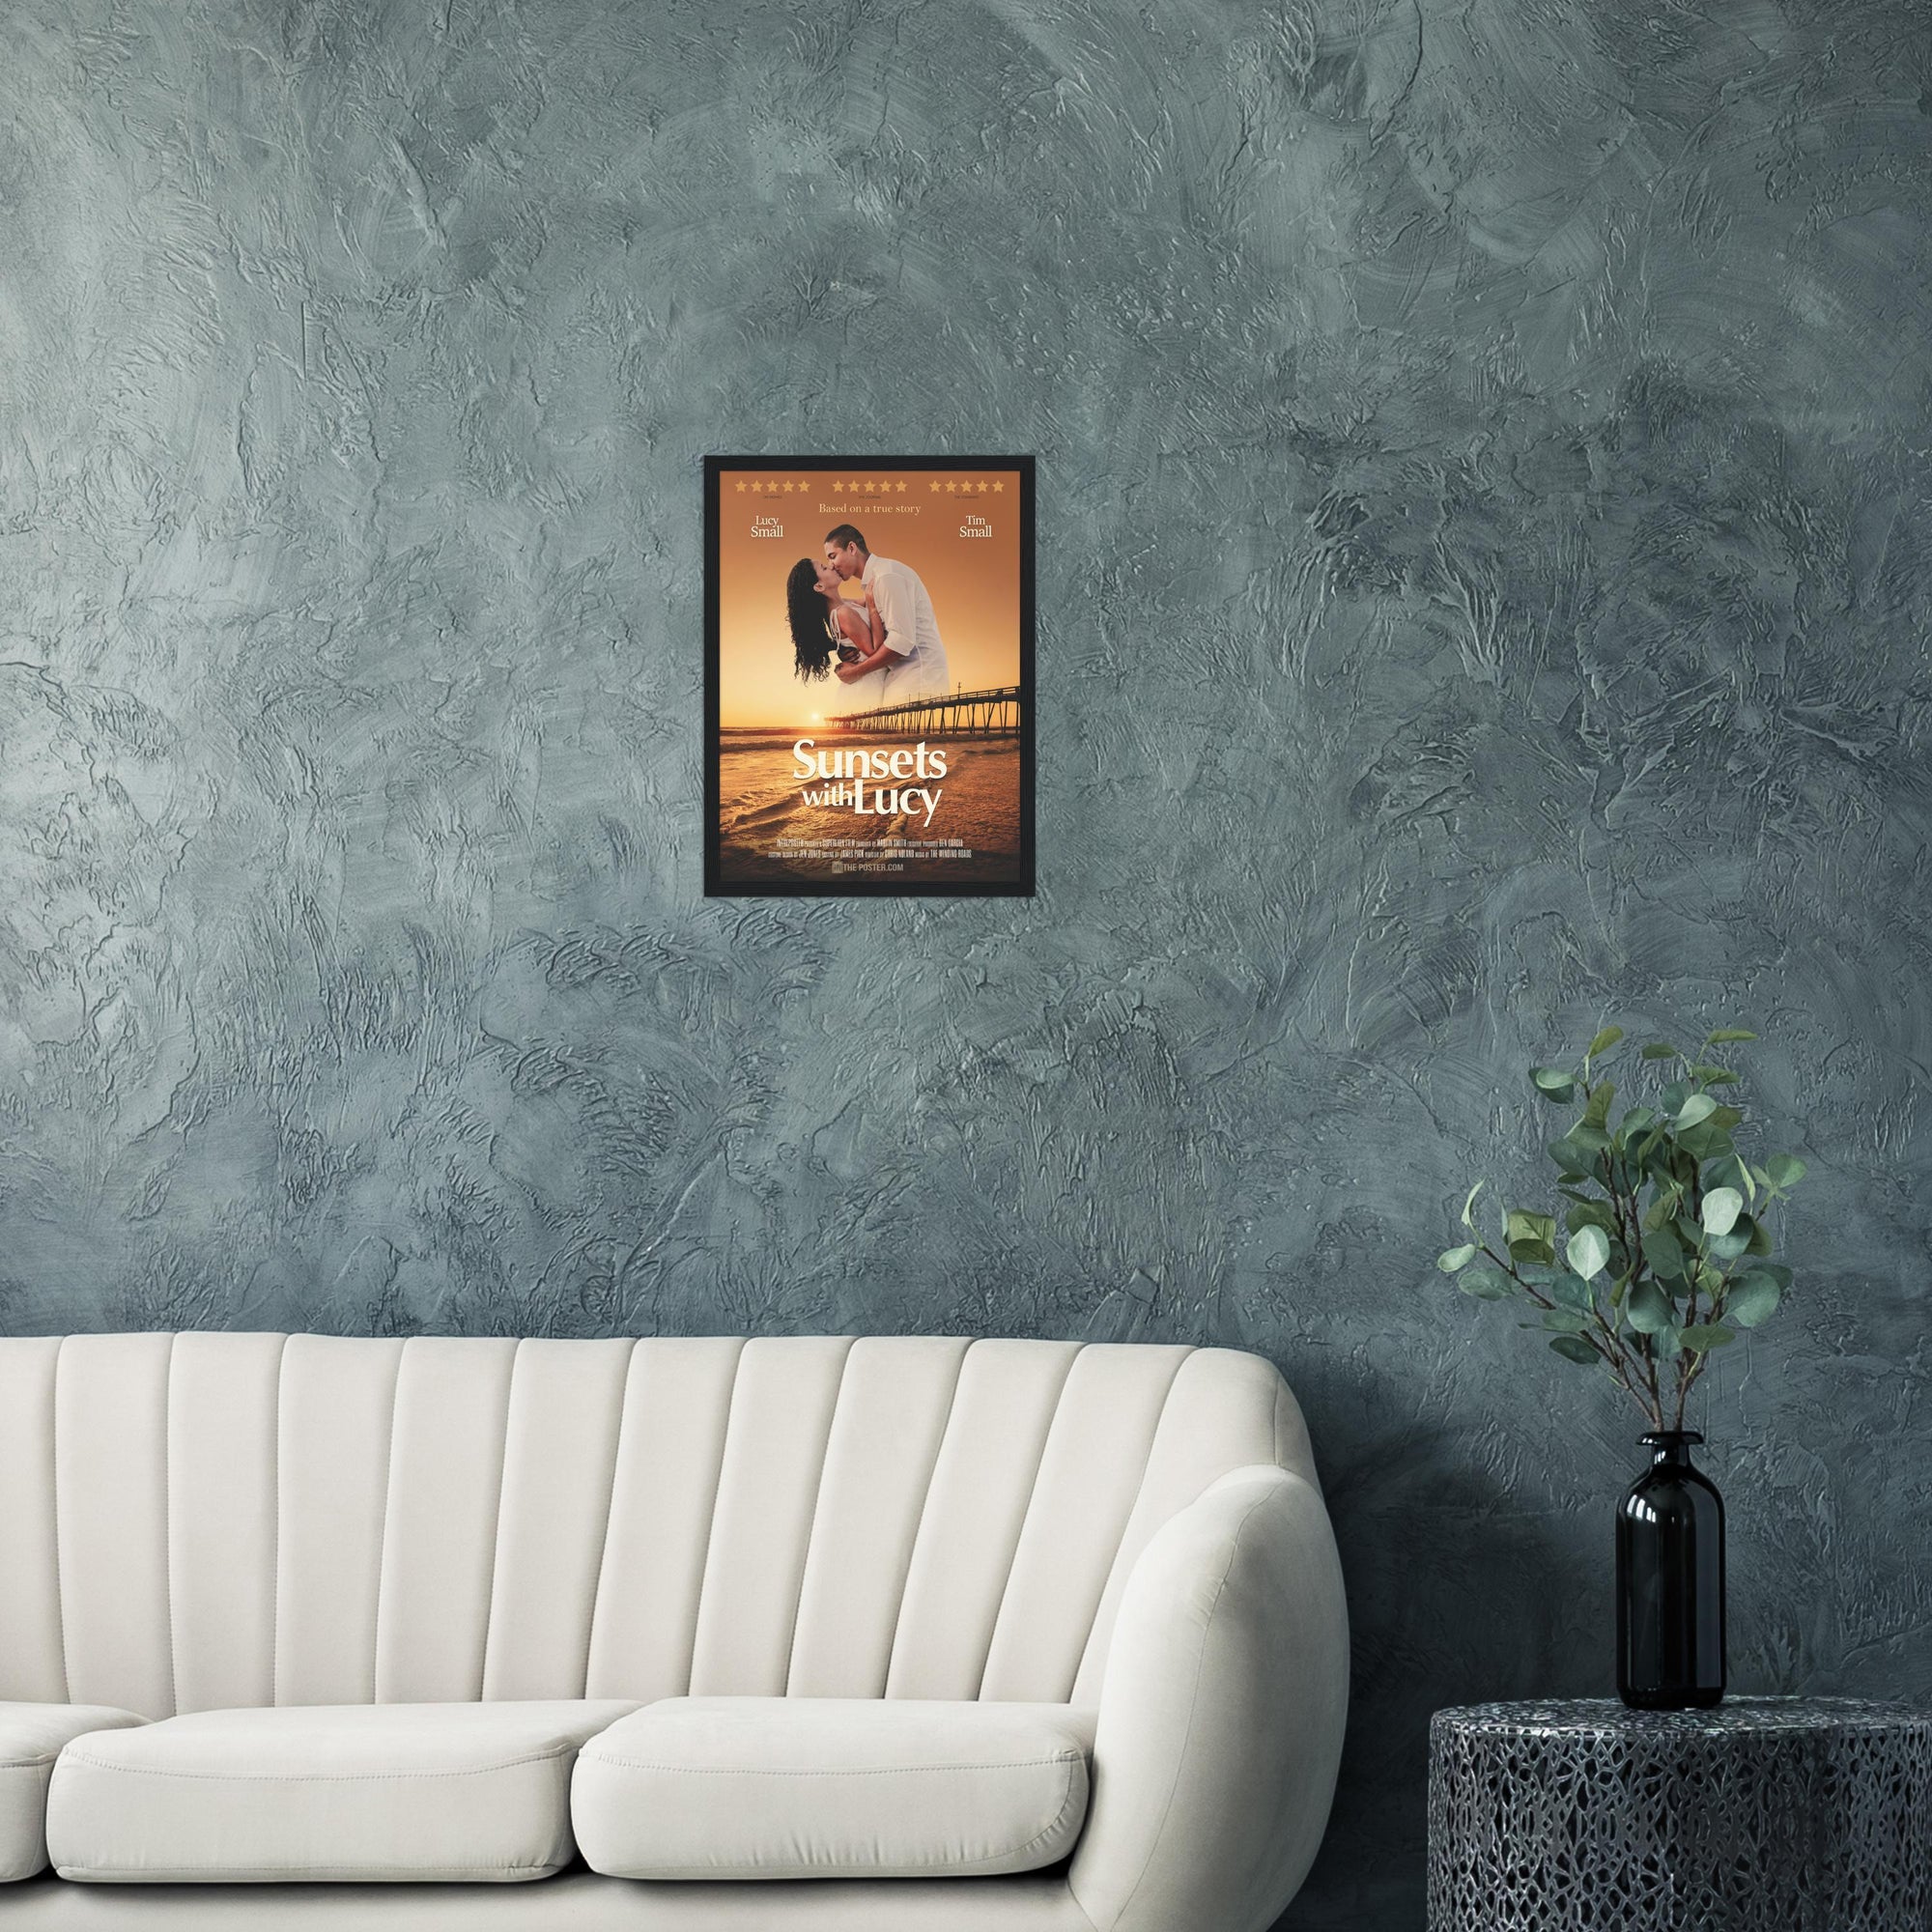 A custom movie poster in a small black frame on the wall above a cream sofa